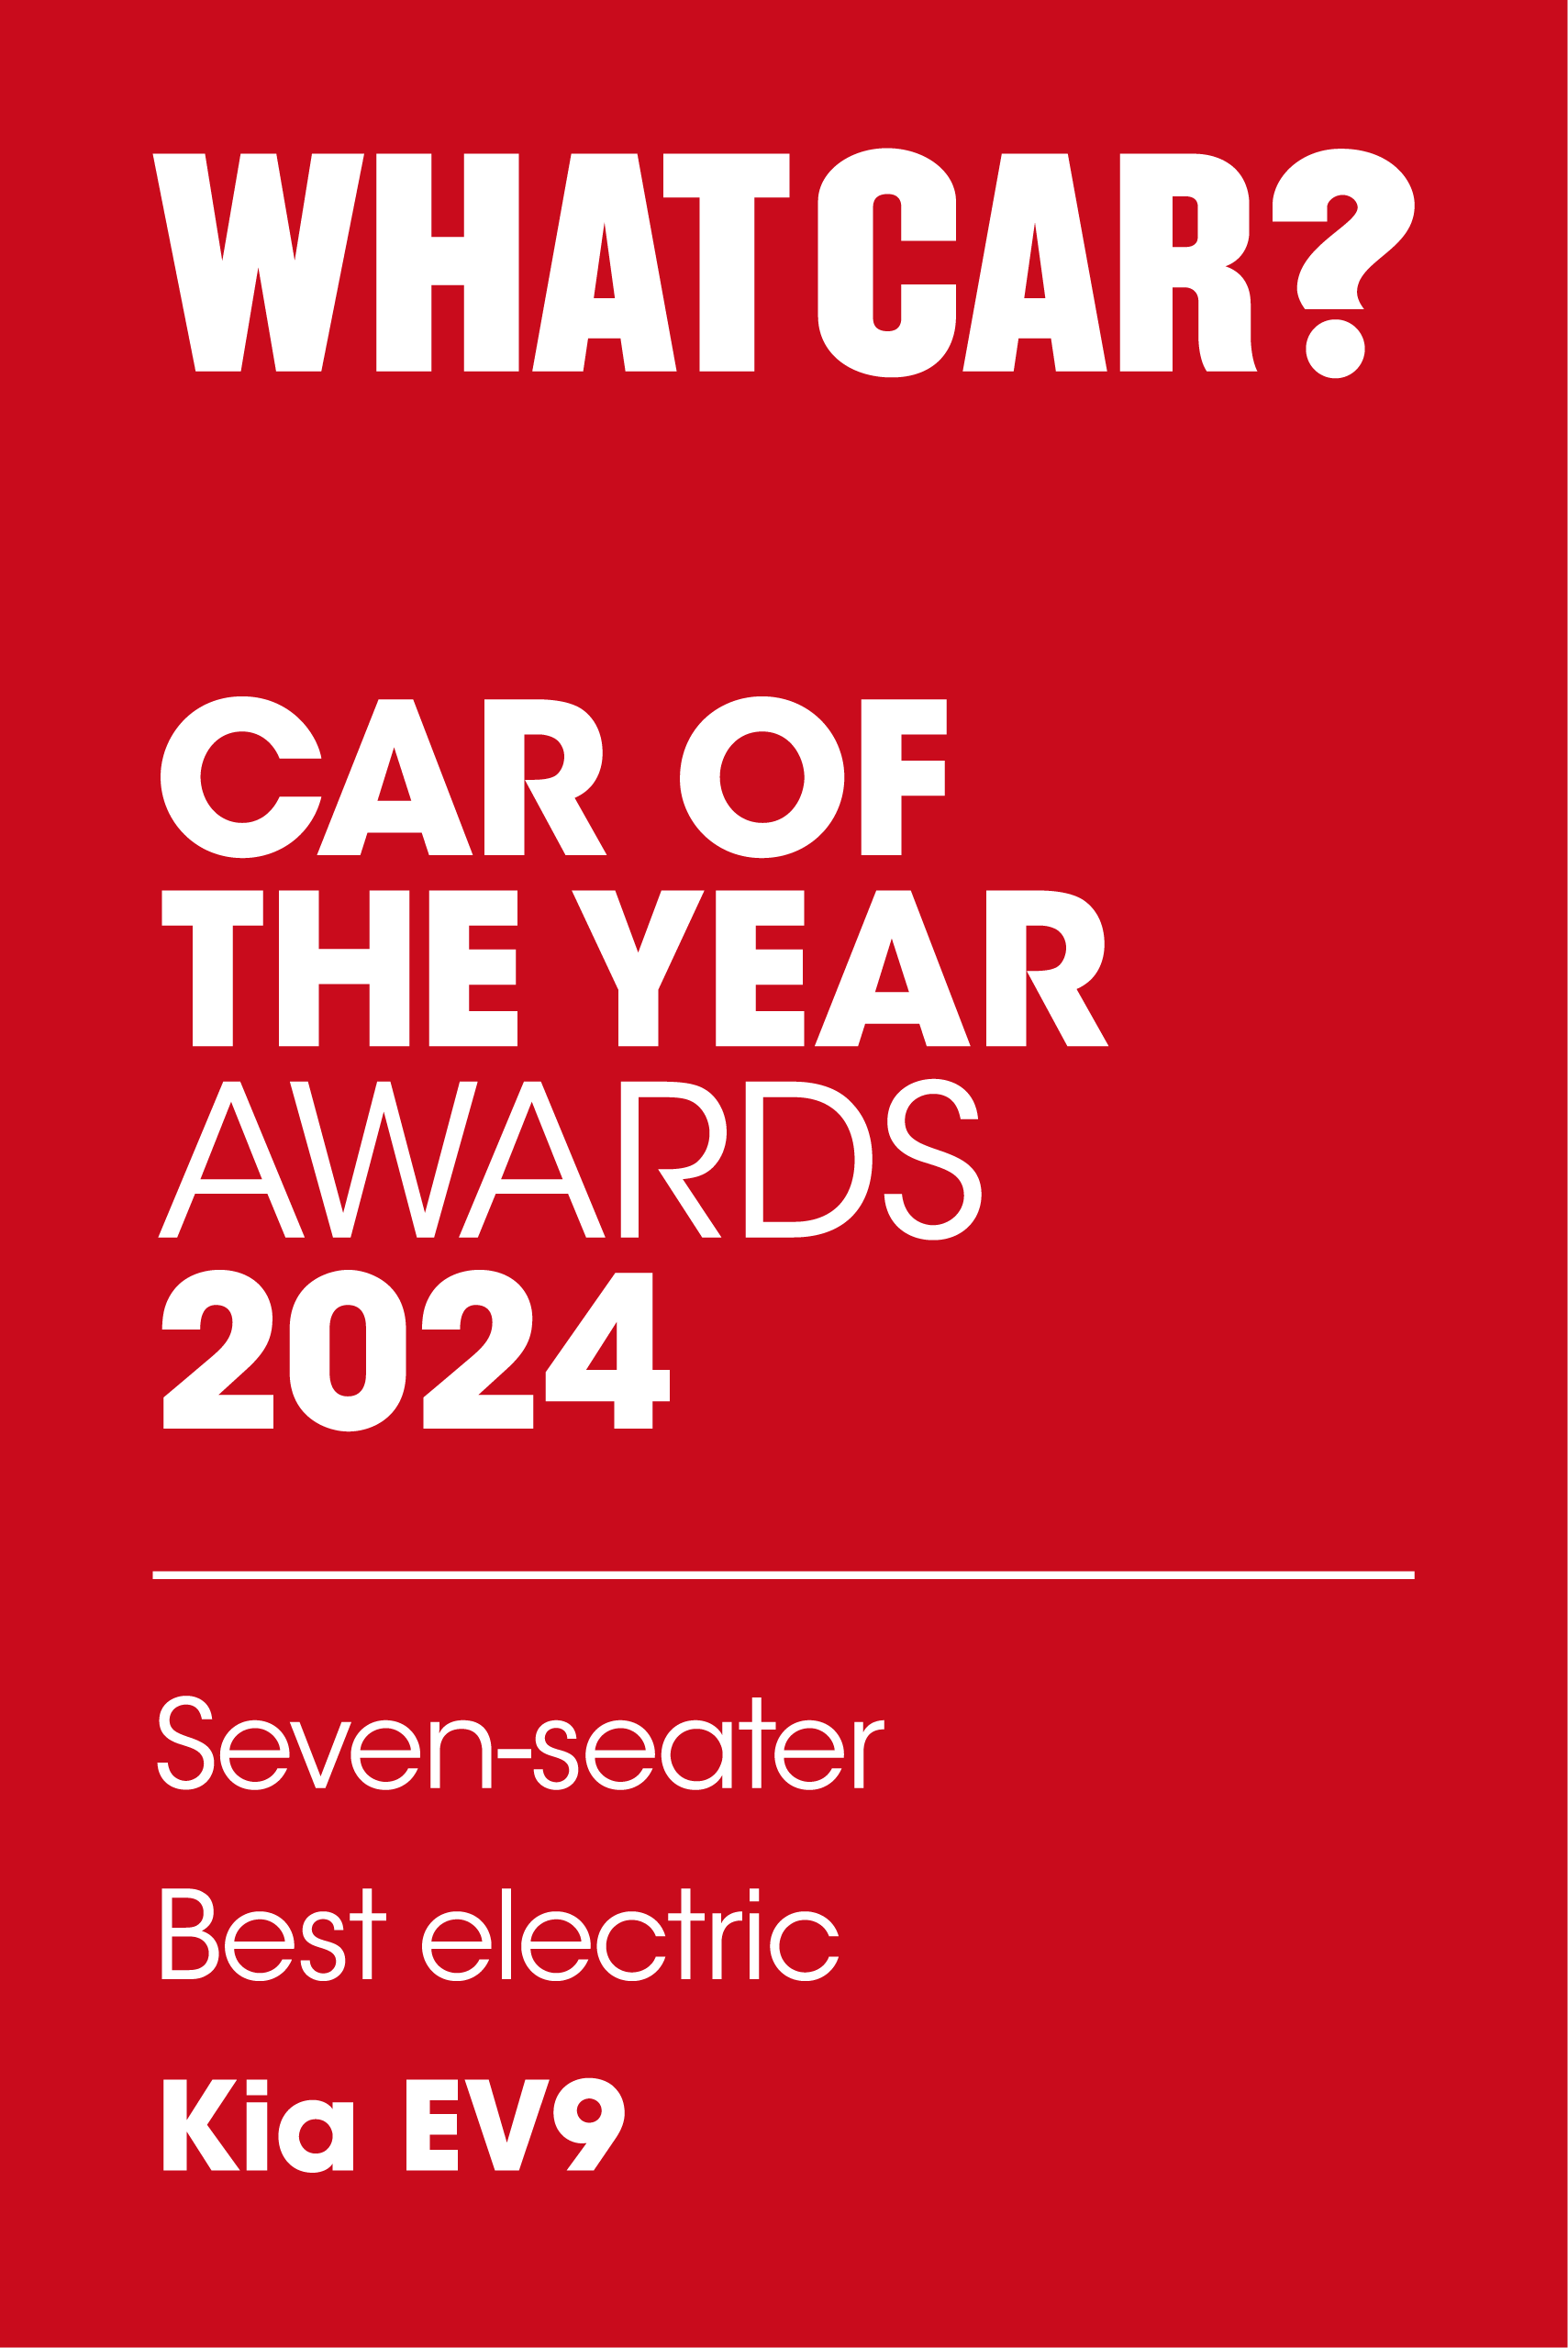 What car? Car of the year awards 2024: Seven-seater, Best electric, EV9